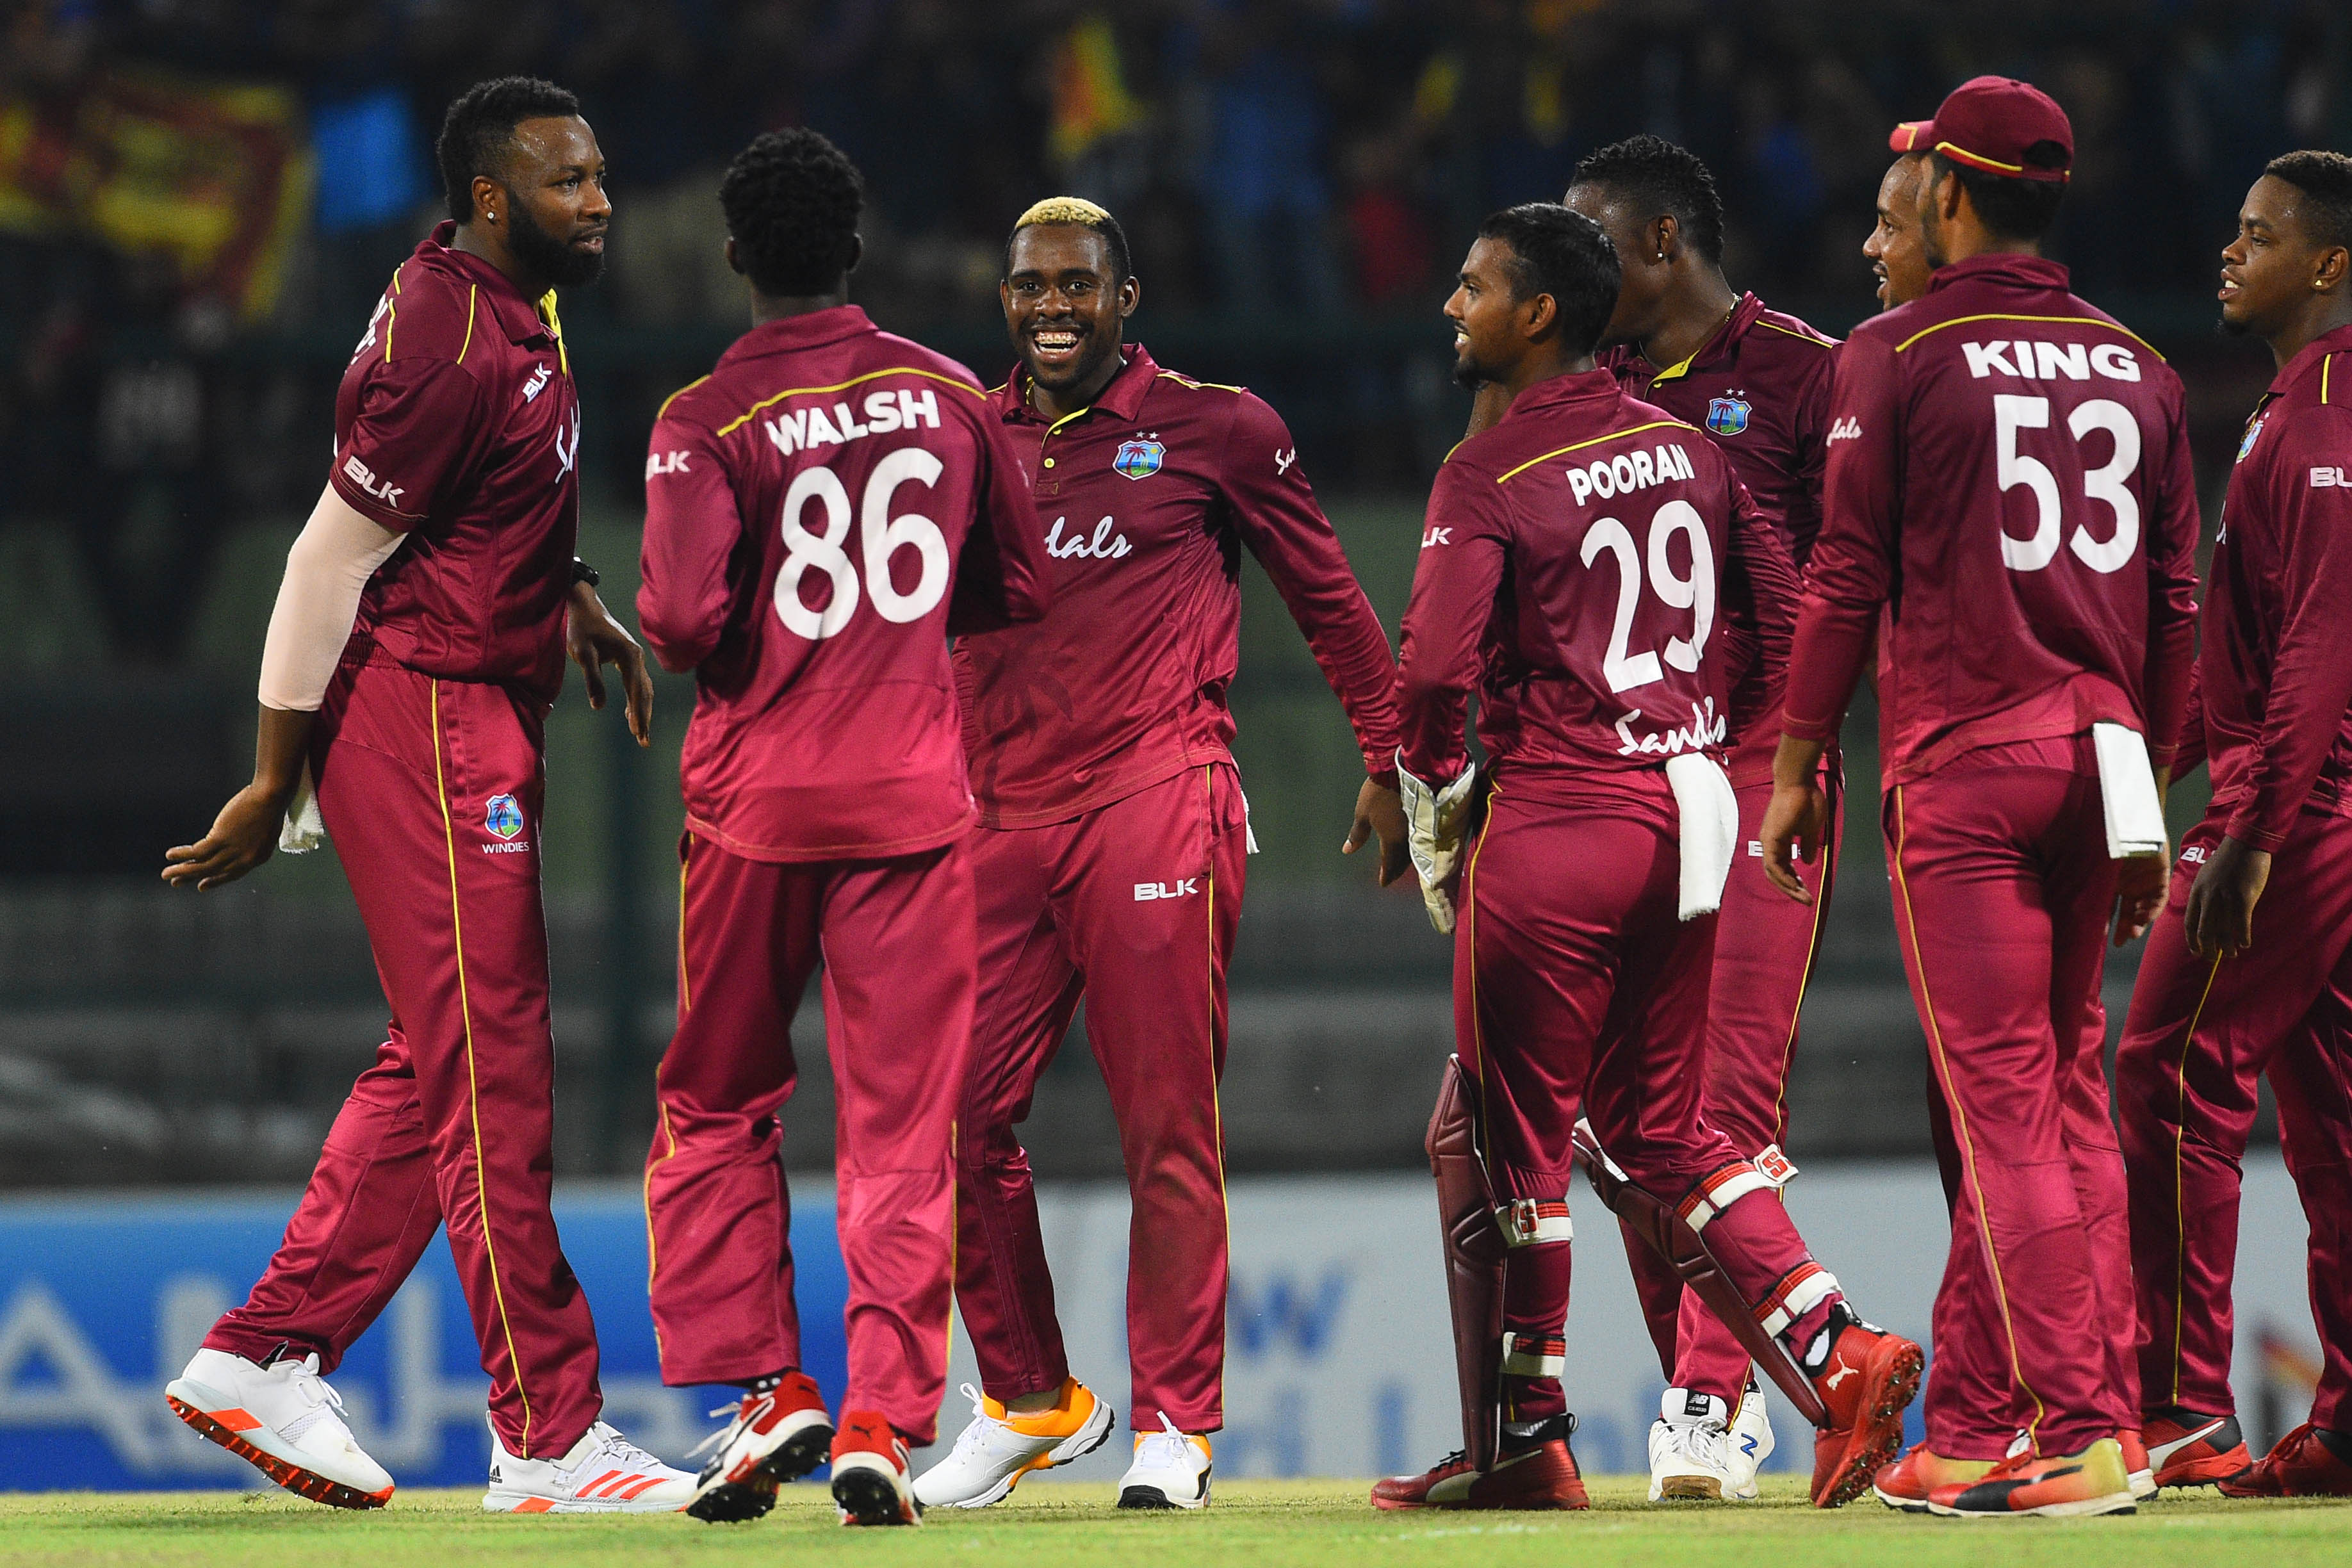 Beaten 2-nil at home last time, Sri Lanka face tough challenge vs. West Indies in their backyard